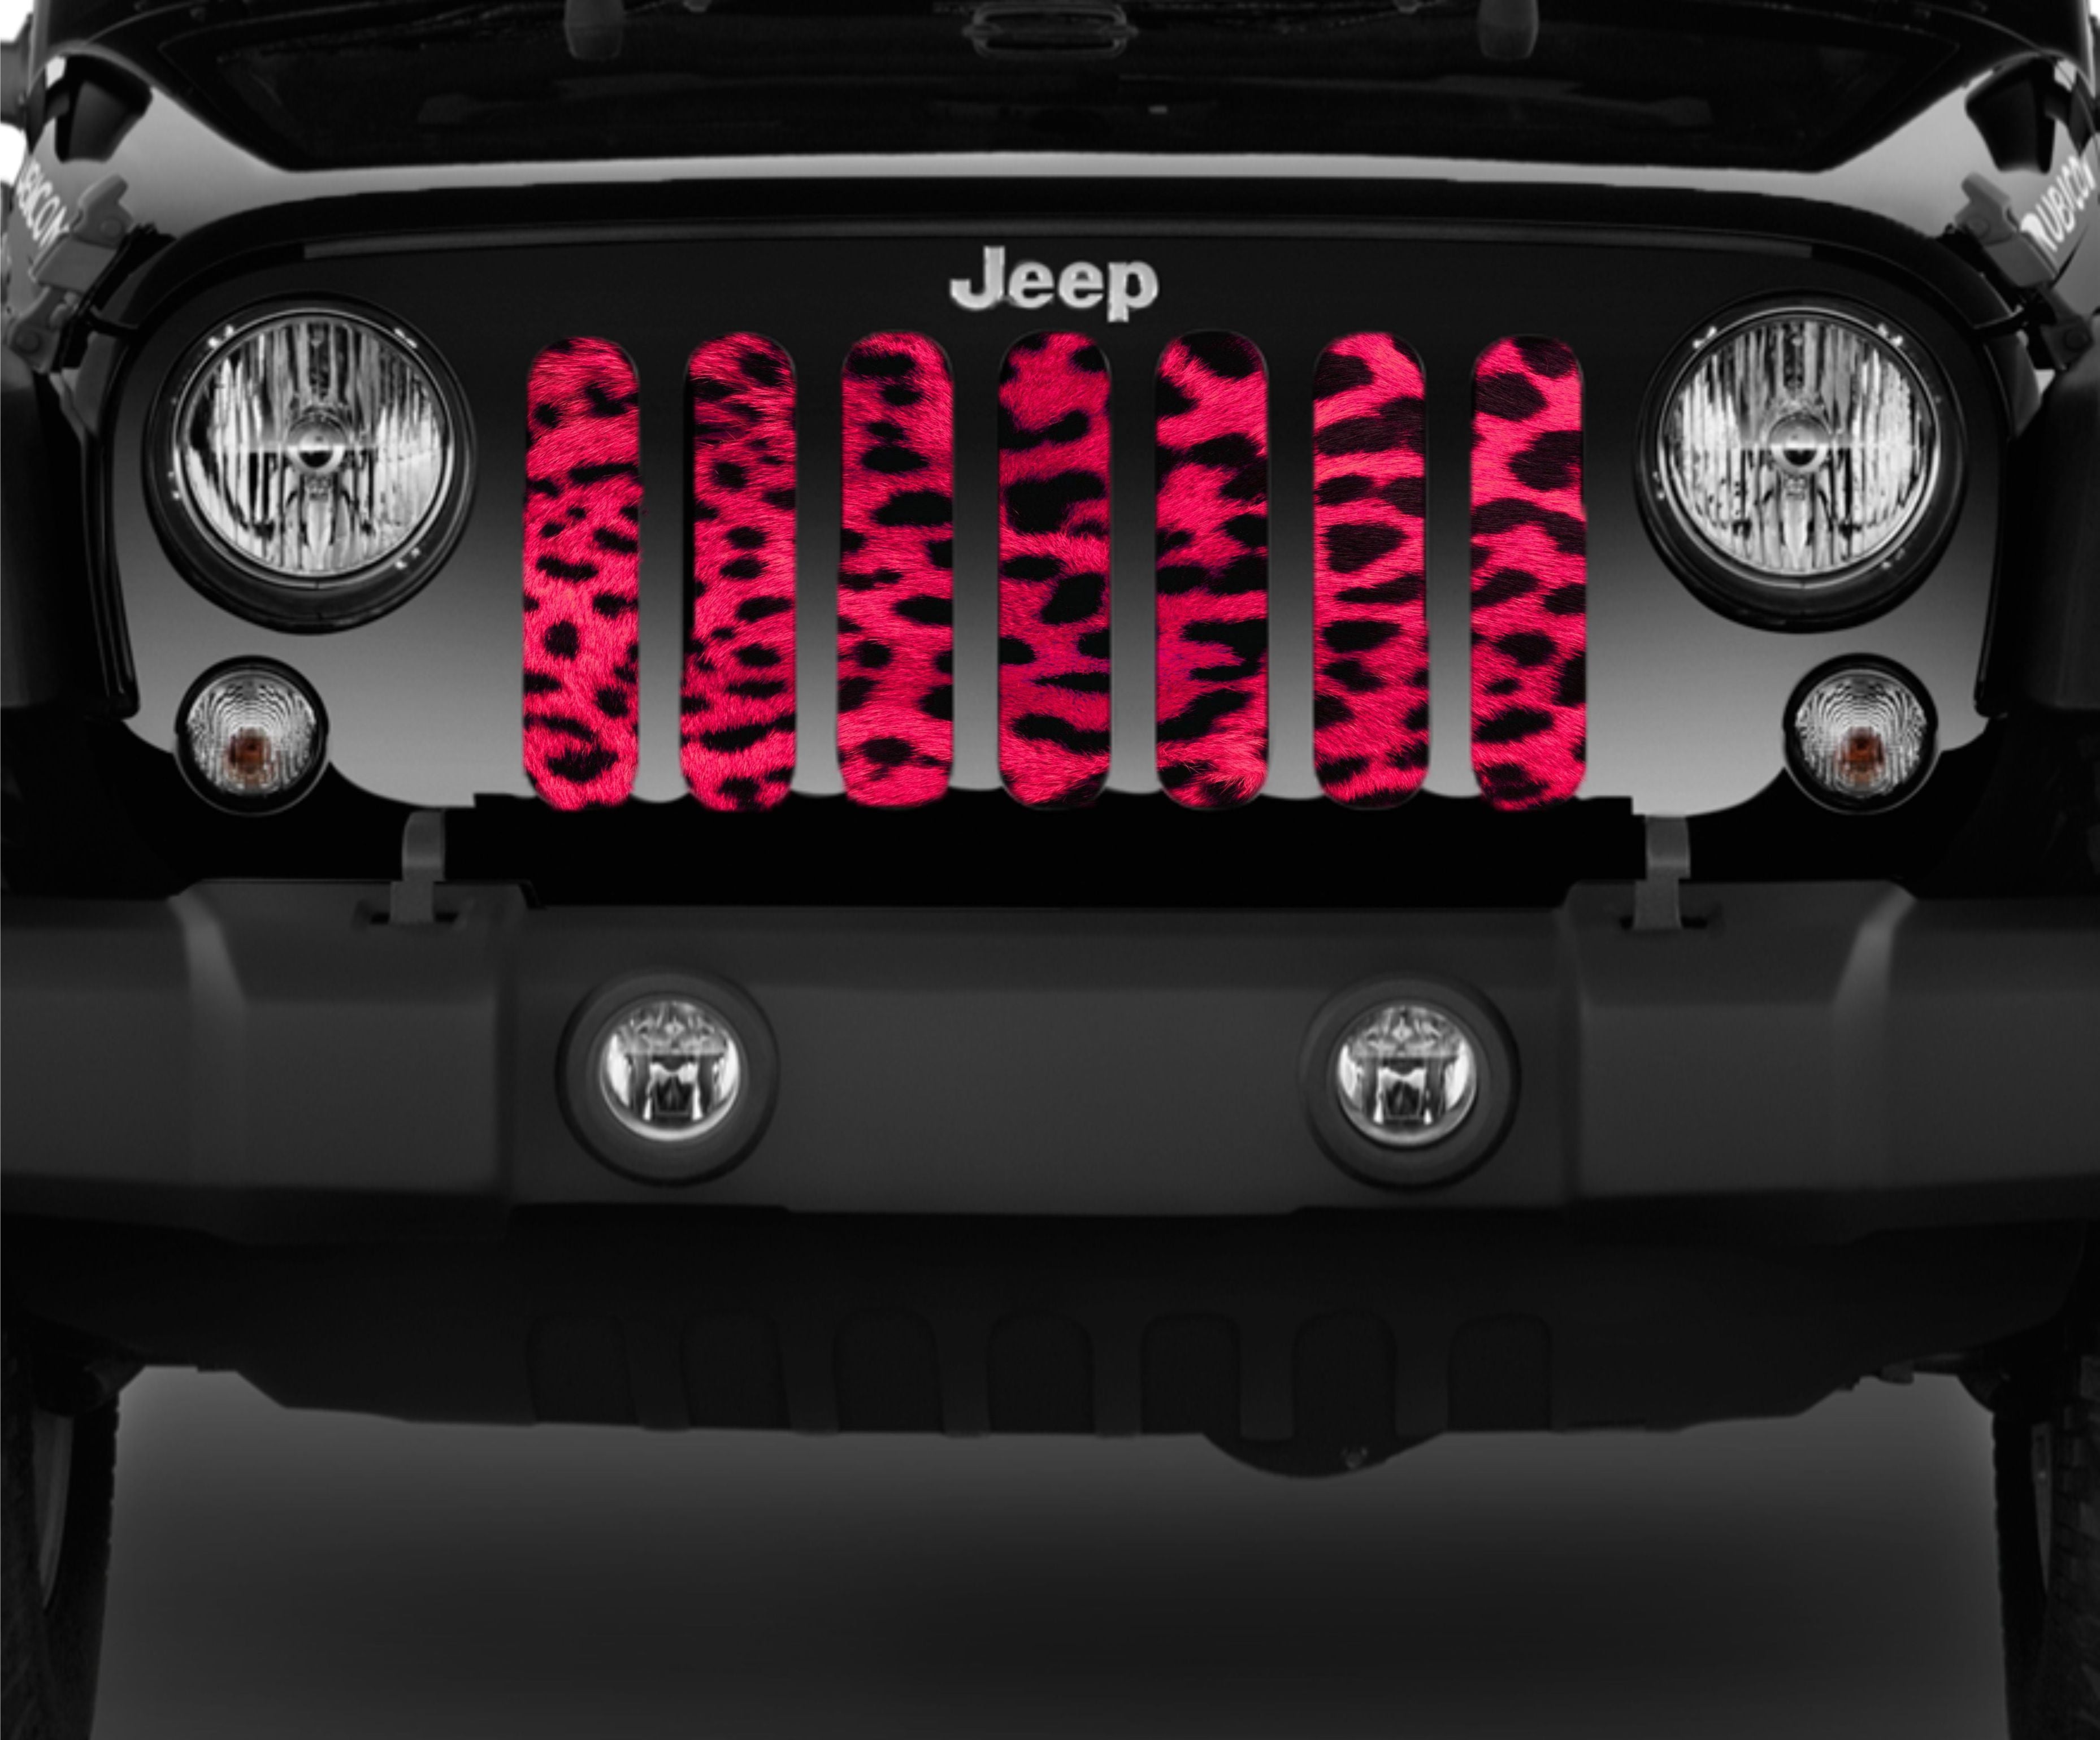 Pink Leopard Cheetah Animal Print Mesh Grille Insert for Jeep